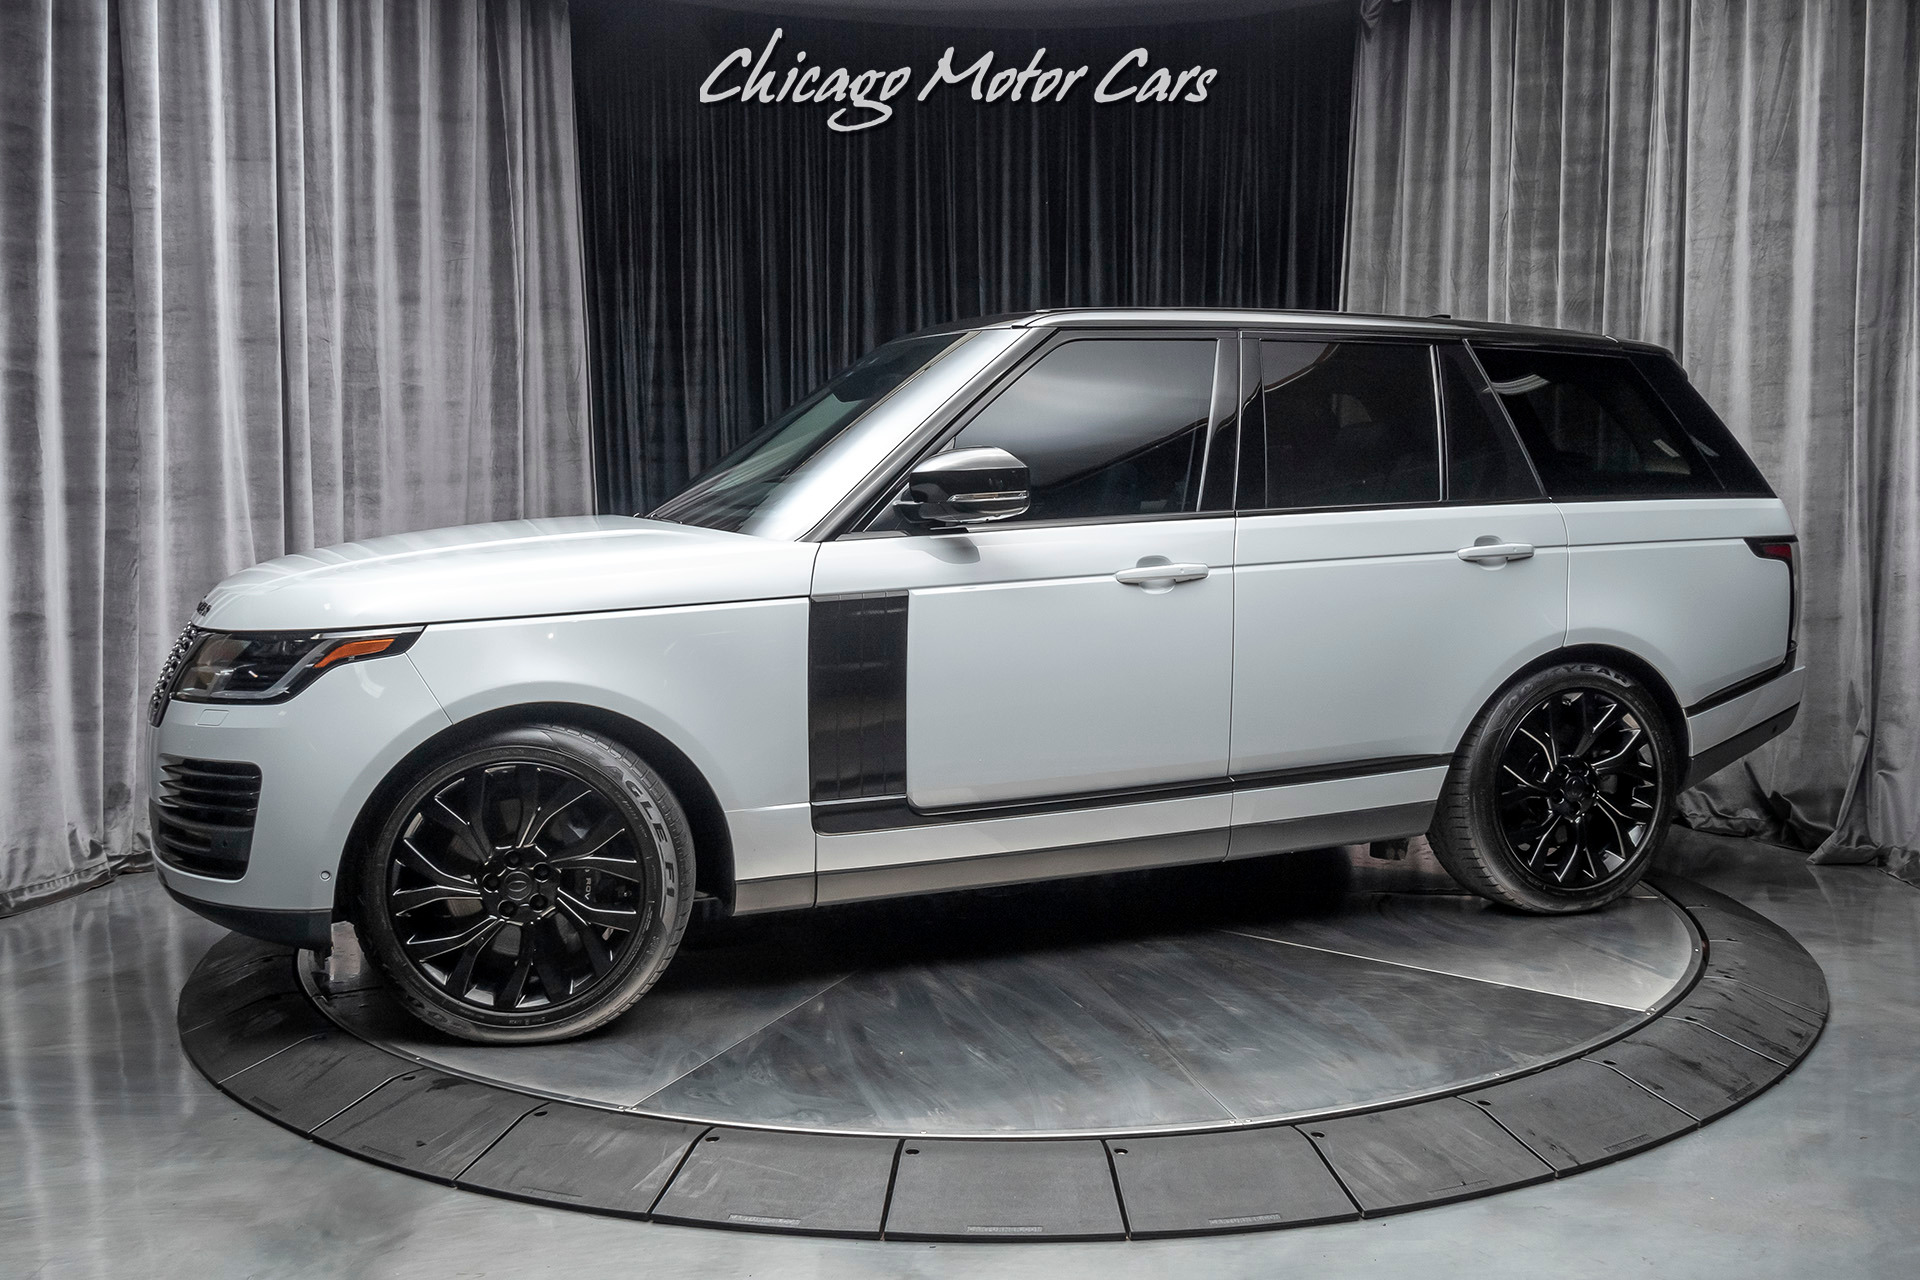 hout tempel Van Used 2018 Land Rover Range Rover Supercharged V8 HSE SUV $117K MSRP For  Sale (Special Pricing) | Chicago Motor Cars Stock #17488A